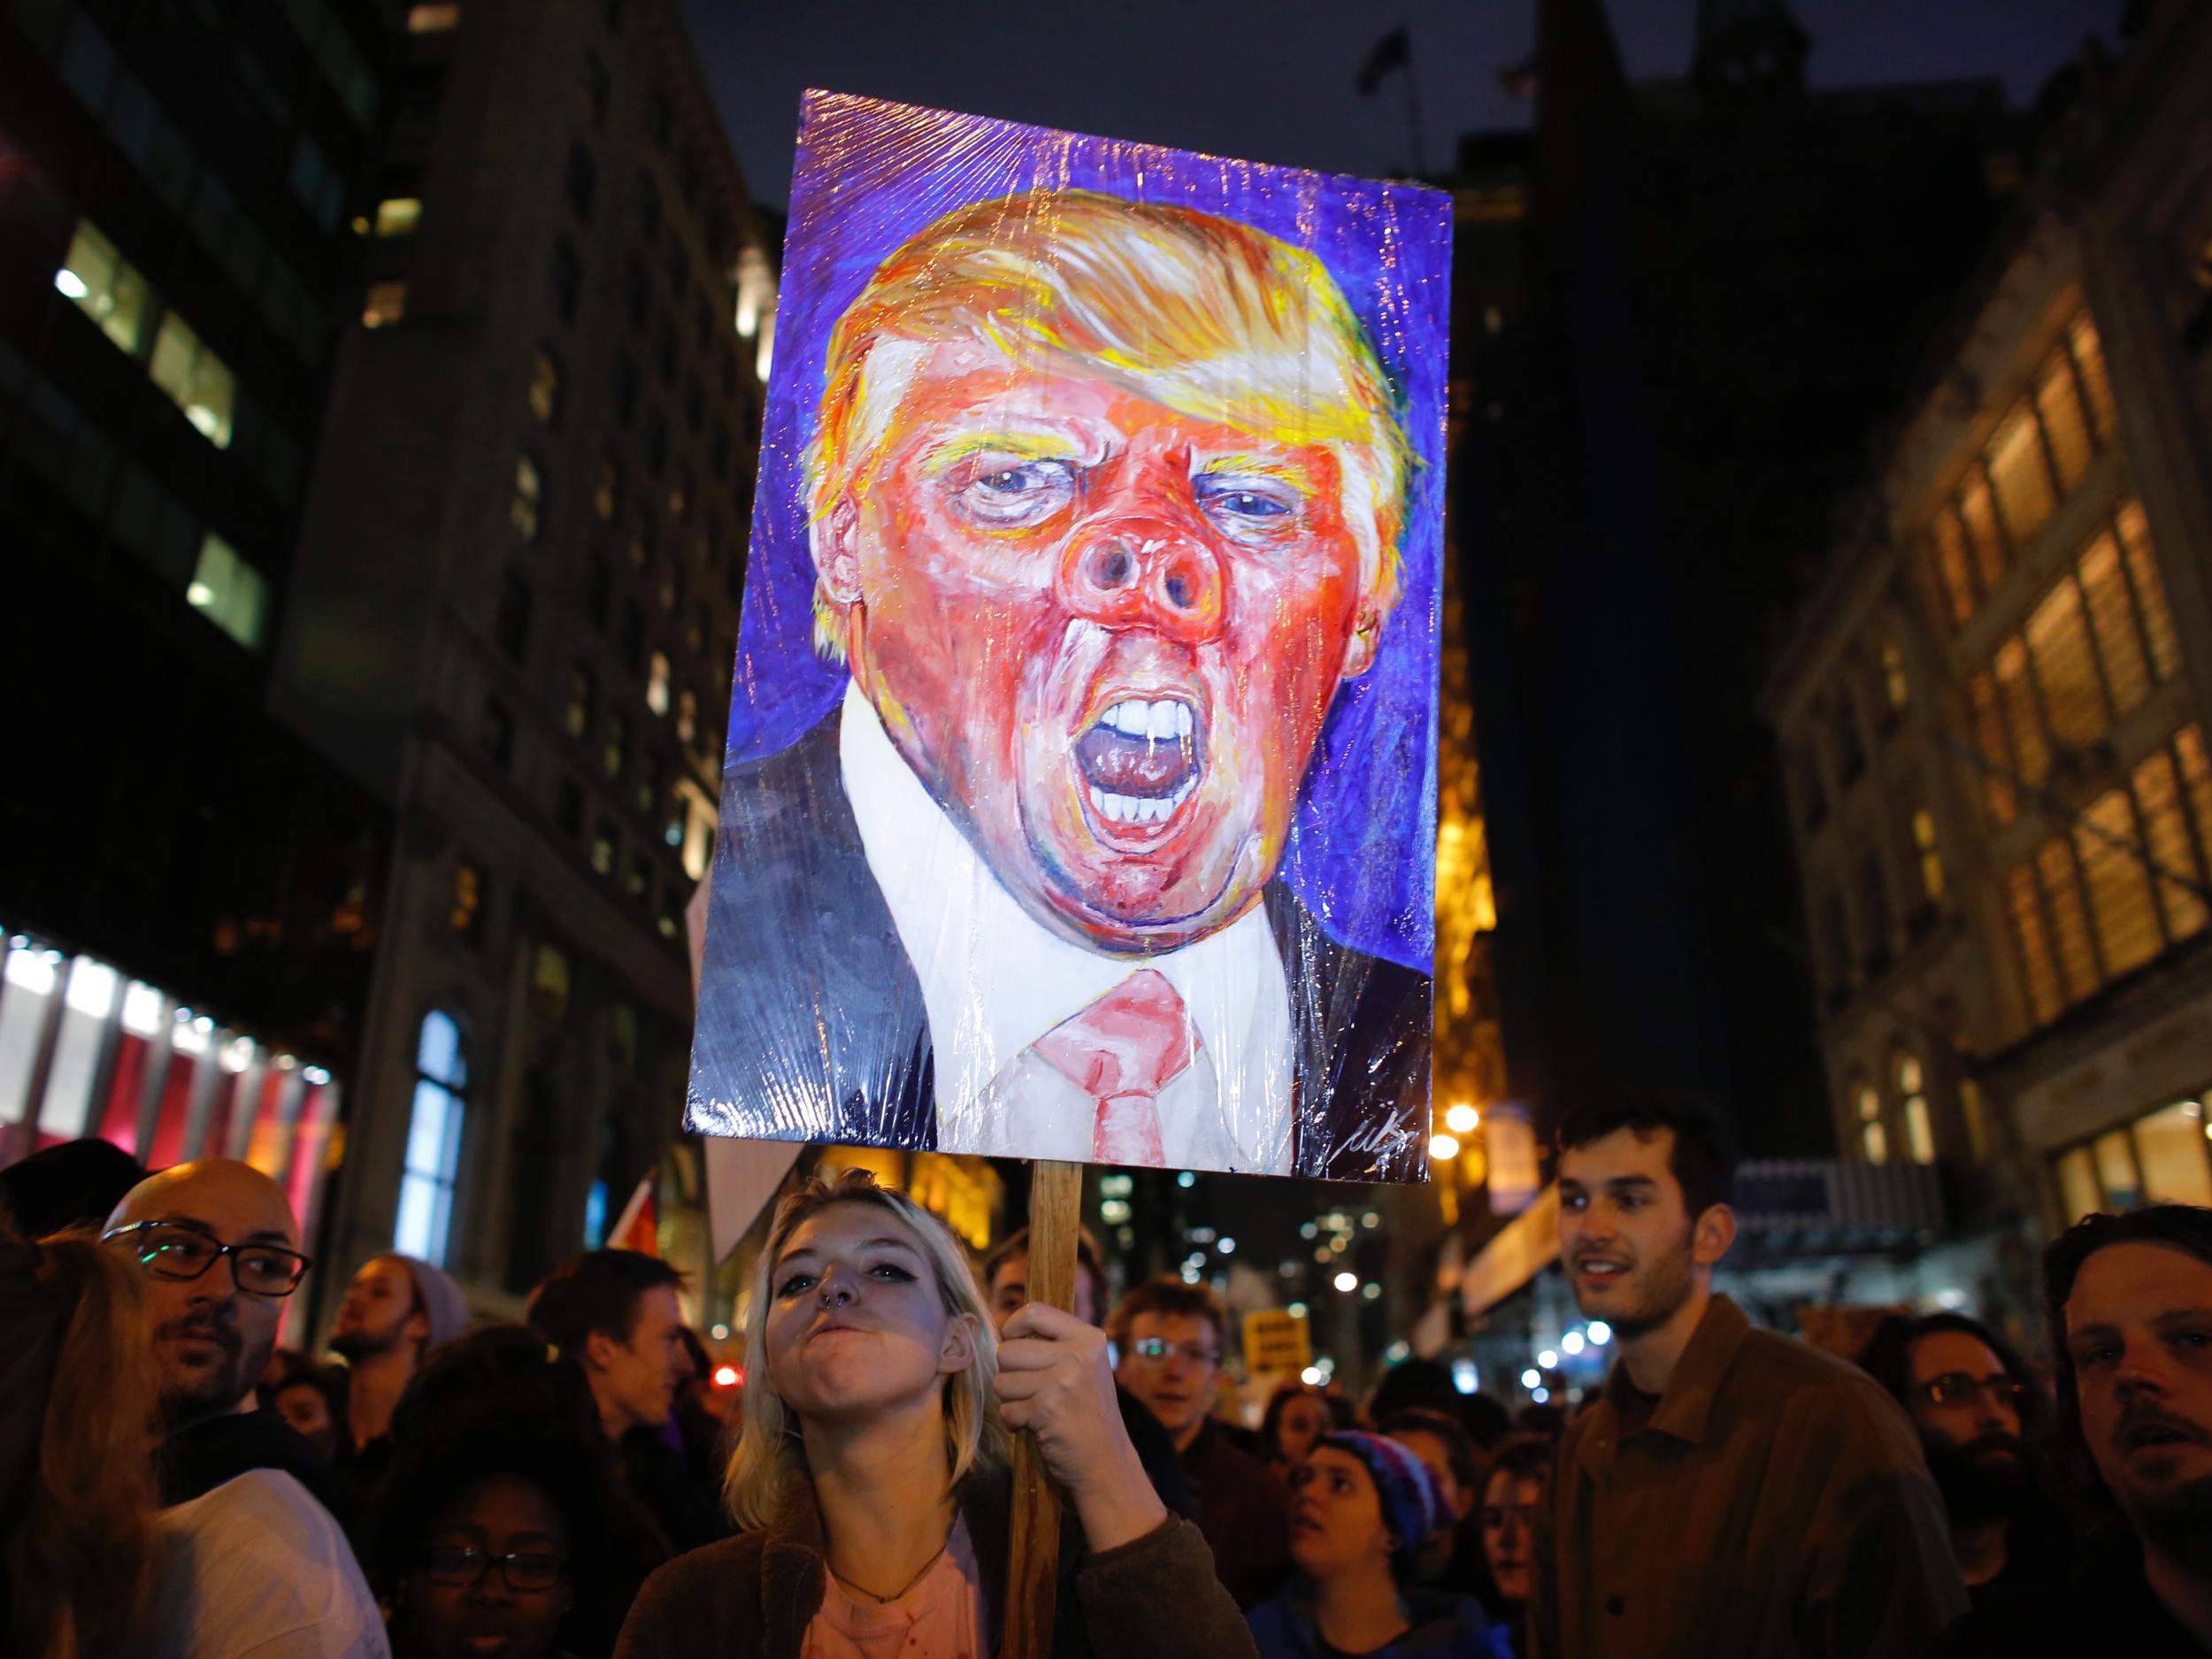 Turkey has issued the warning in light of anti-Trump protests, such as this one in New York